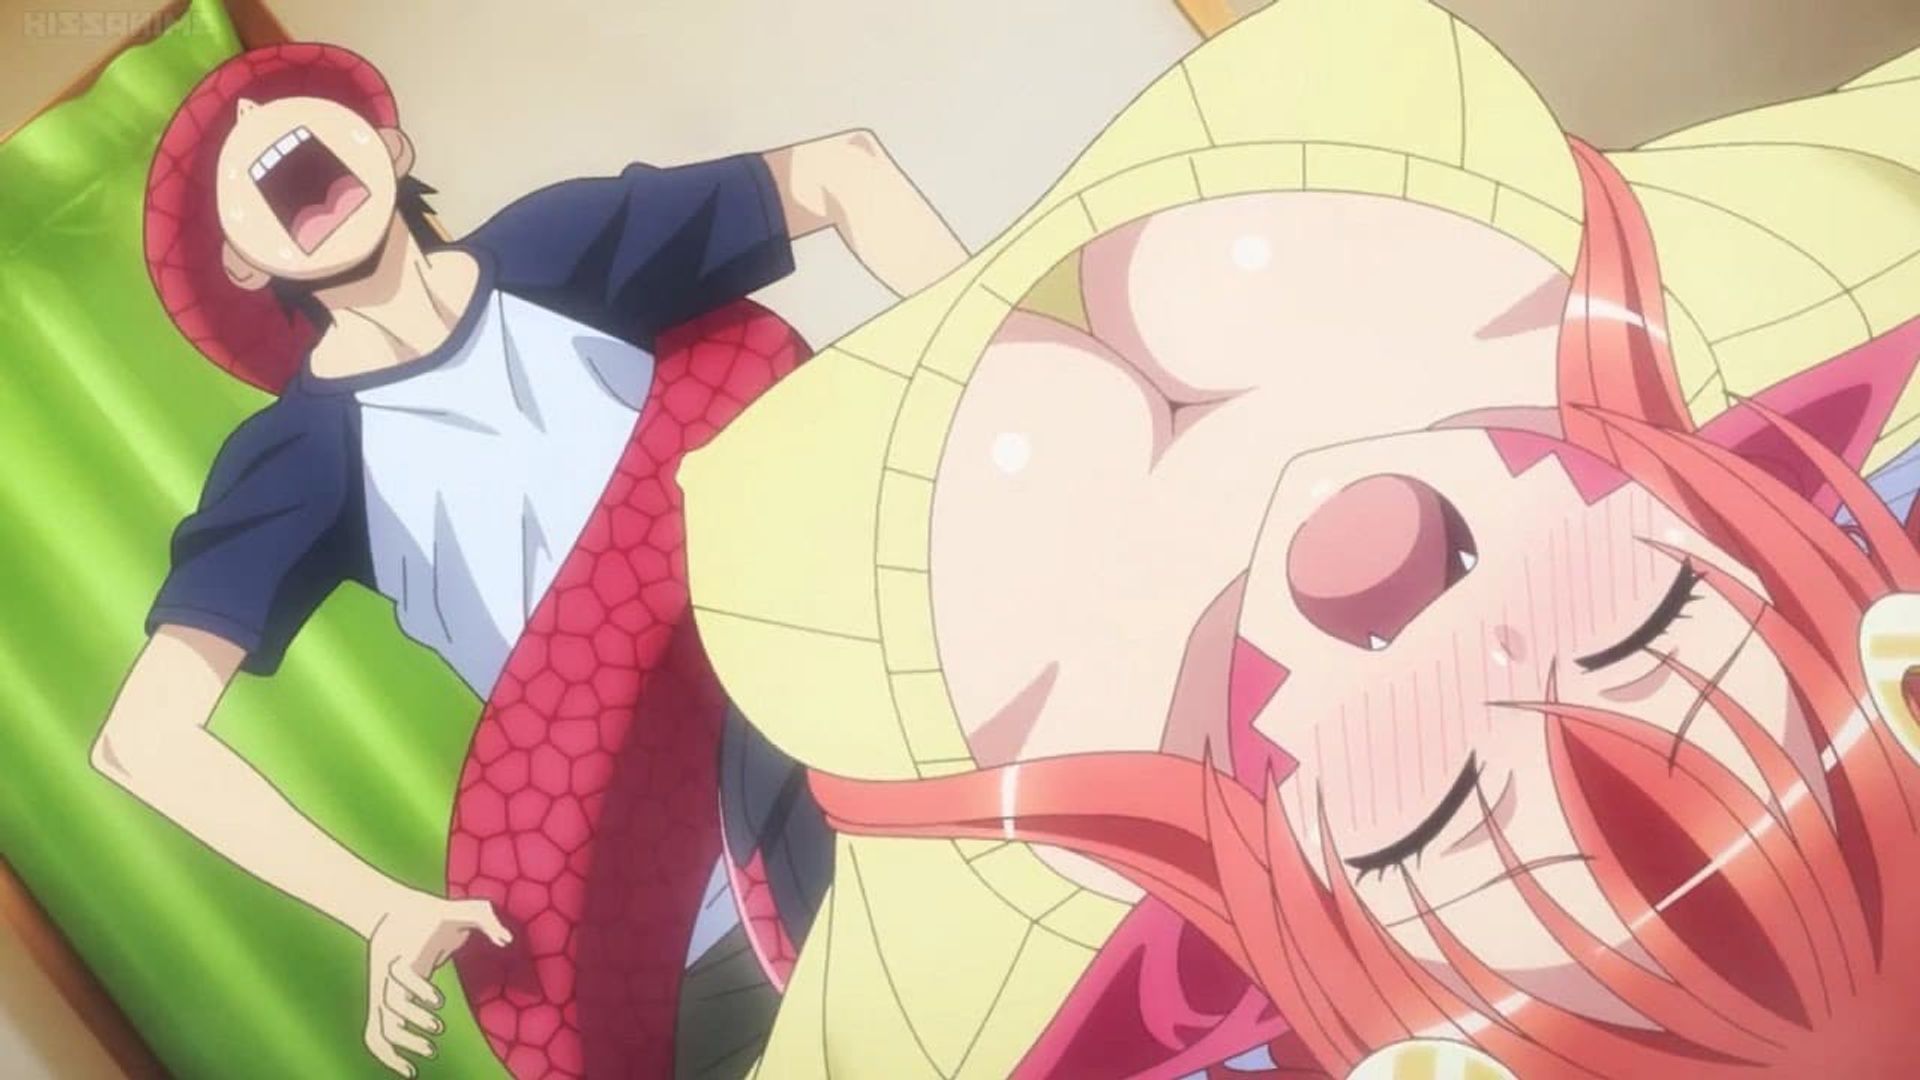 danielle marine share monster musume episode 3 uncensored photos